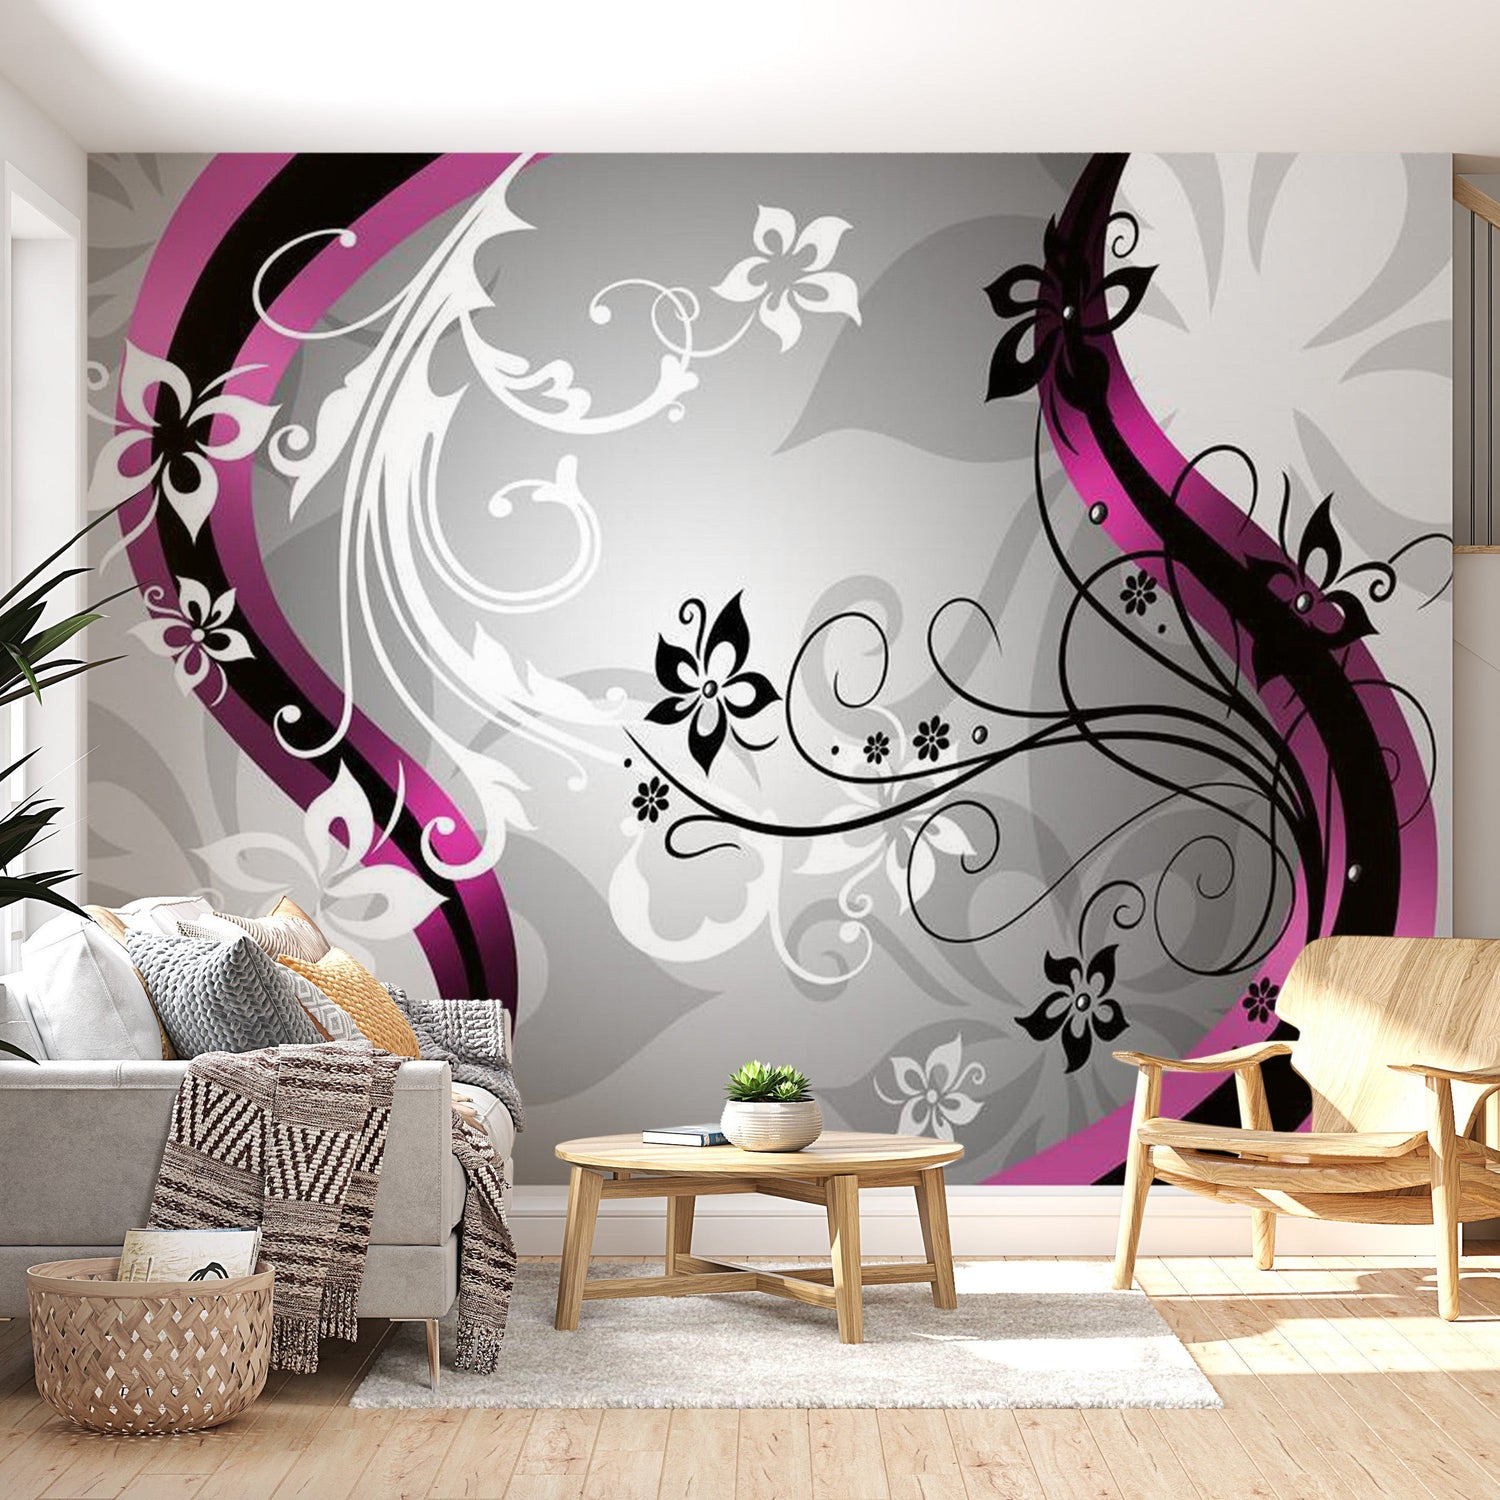 Peel & Stick Glam Wall Mural - Art-Flowers Pink - Removable Wall Decals